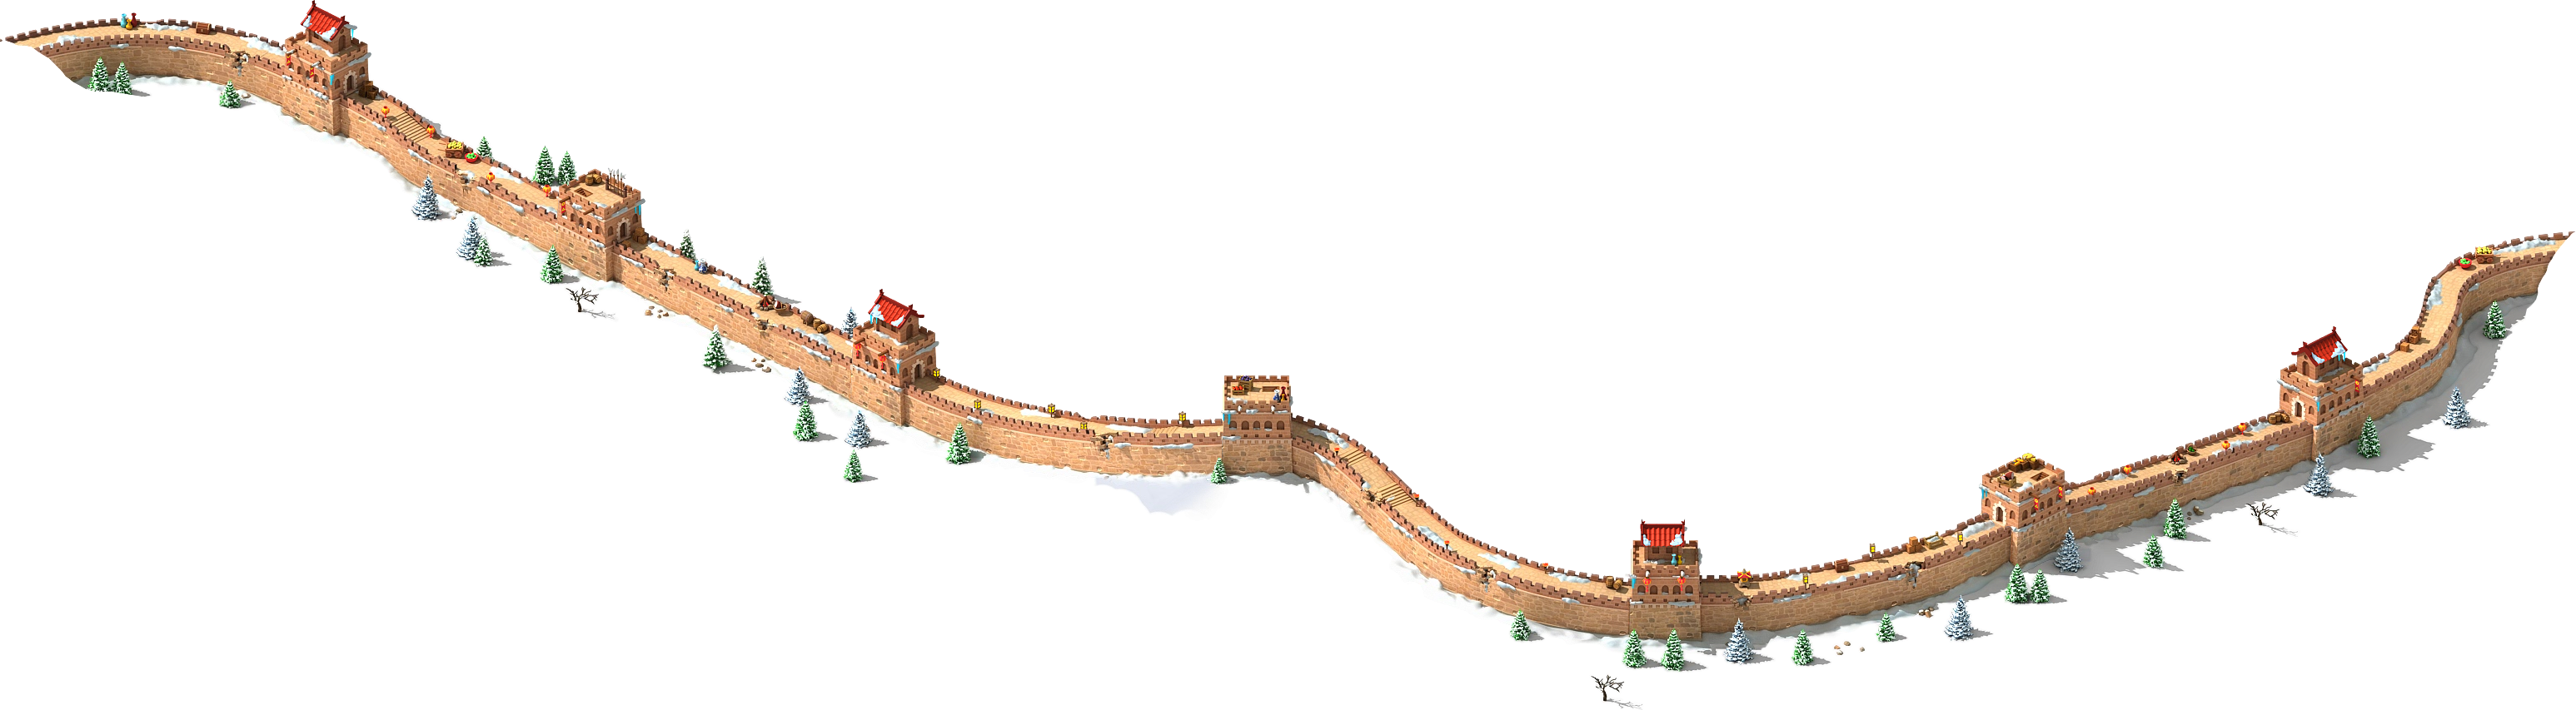 The Great Wall of China Transparent Image